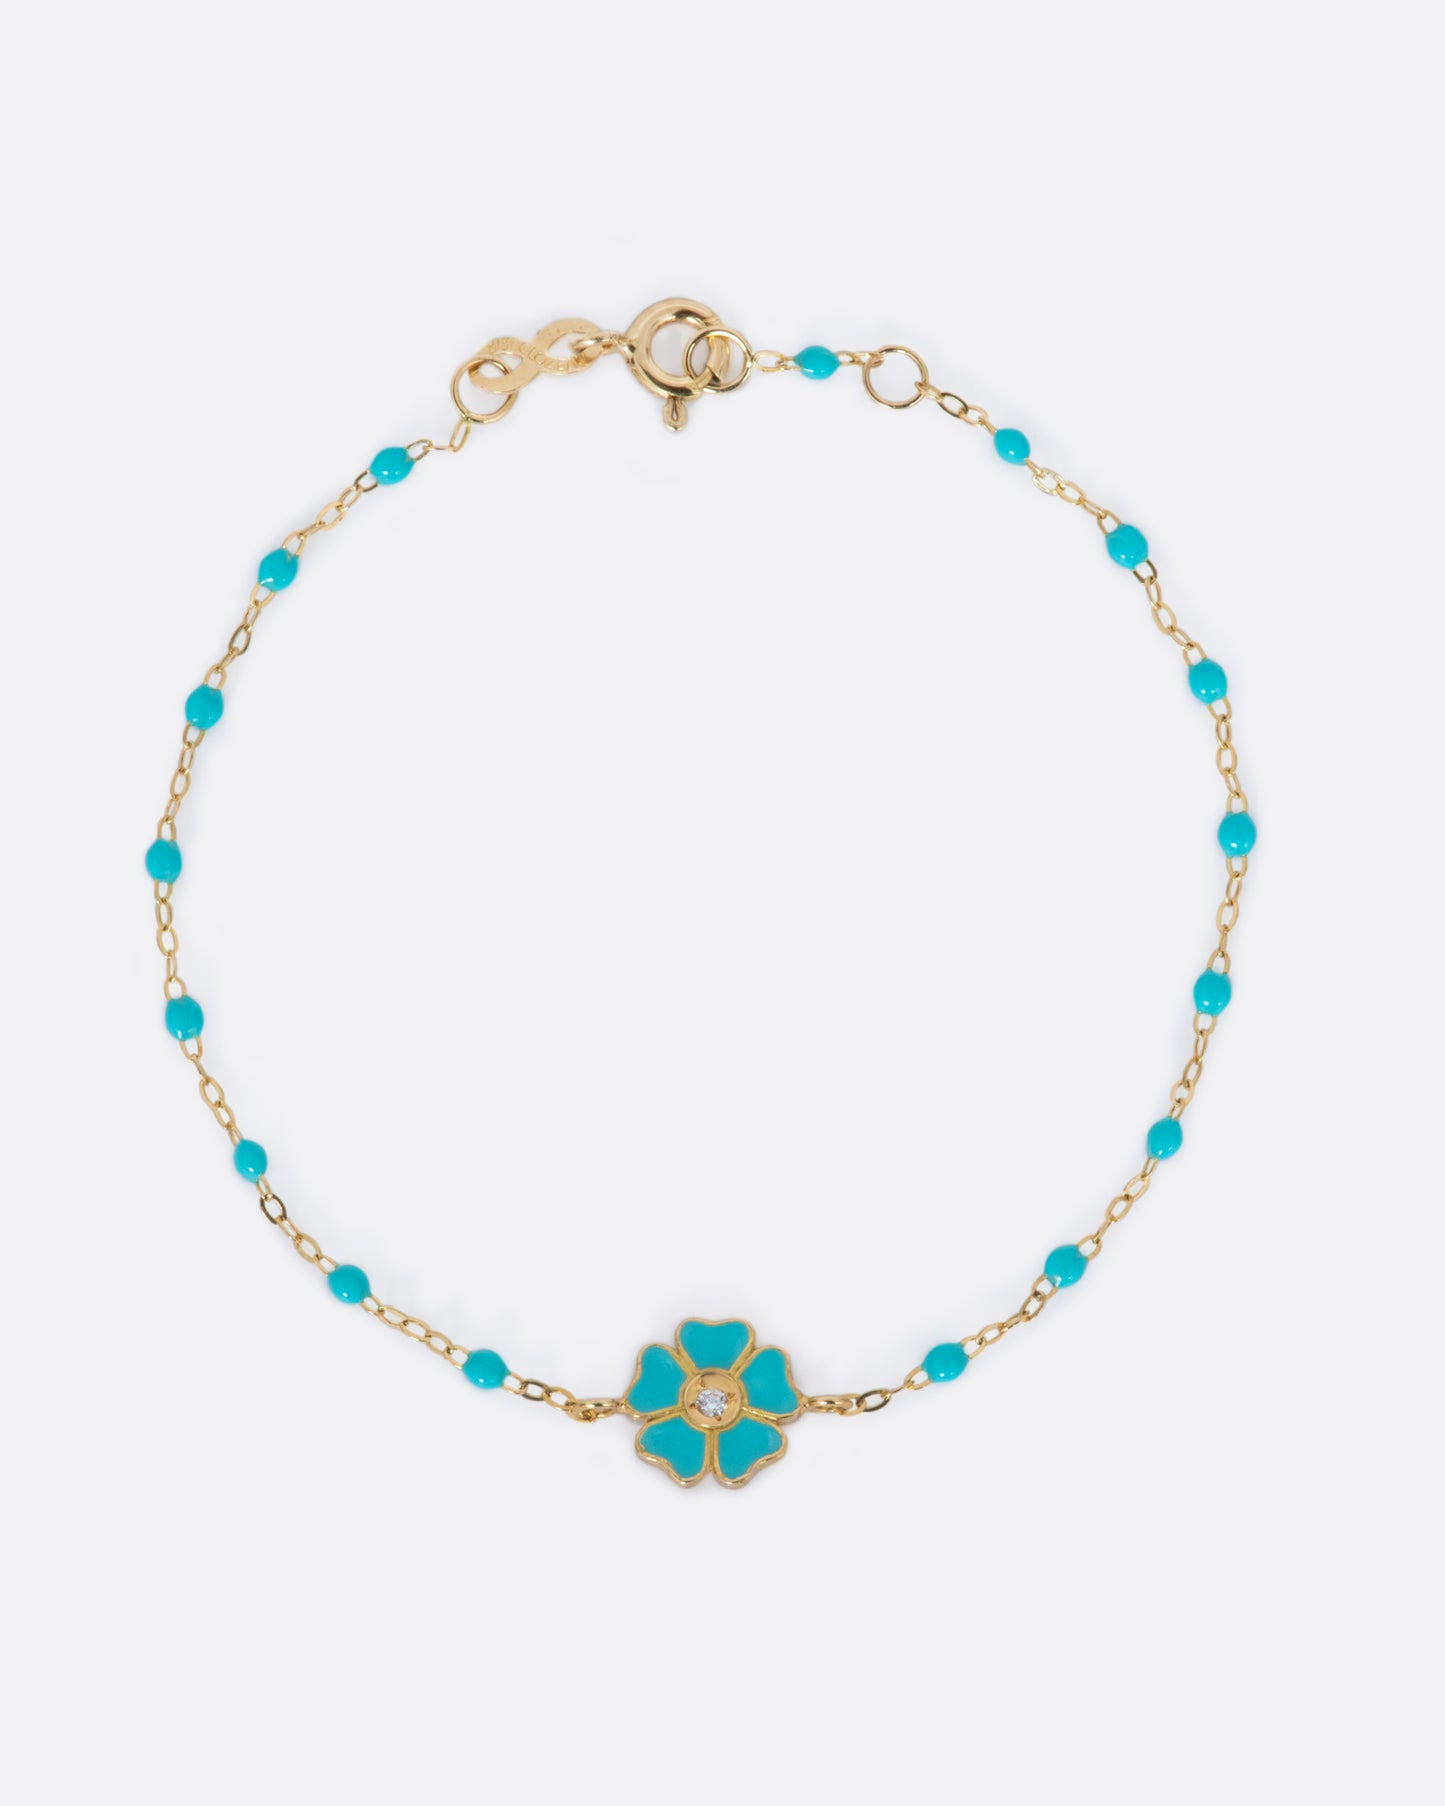 A yellow gold and turquoise green resin Gigi Clozeau bracelet with a flower and a diamond at its center